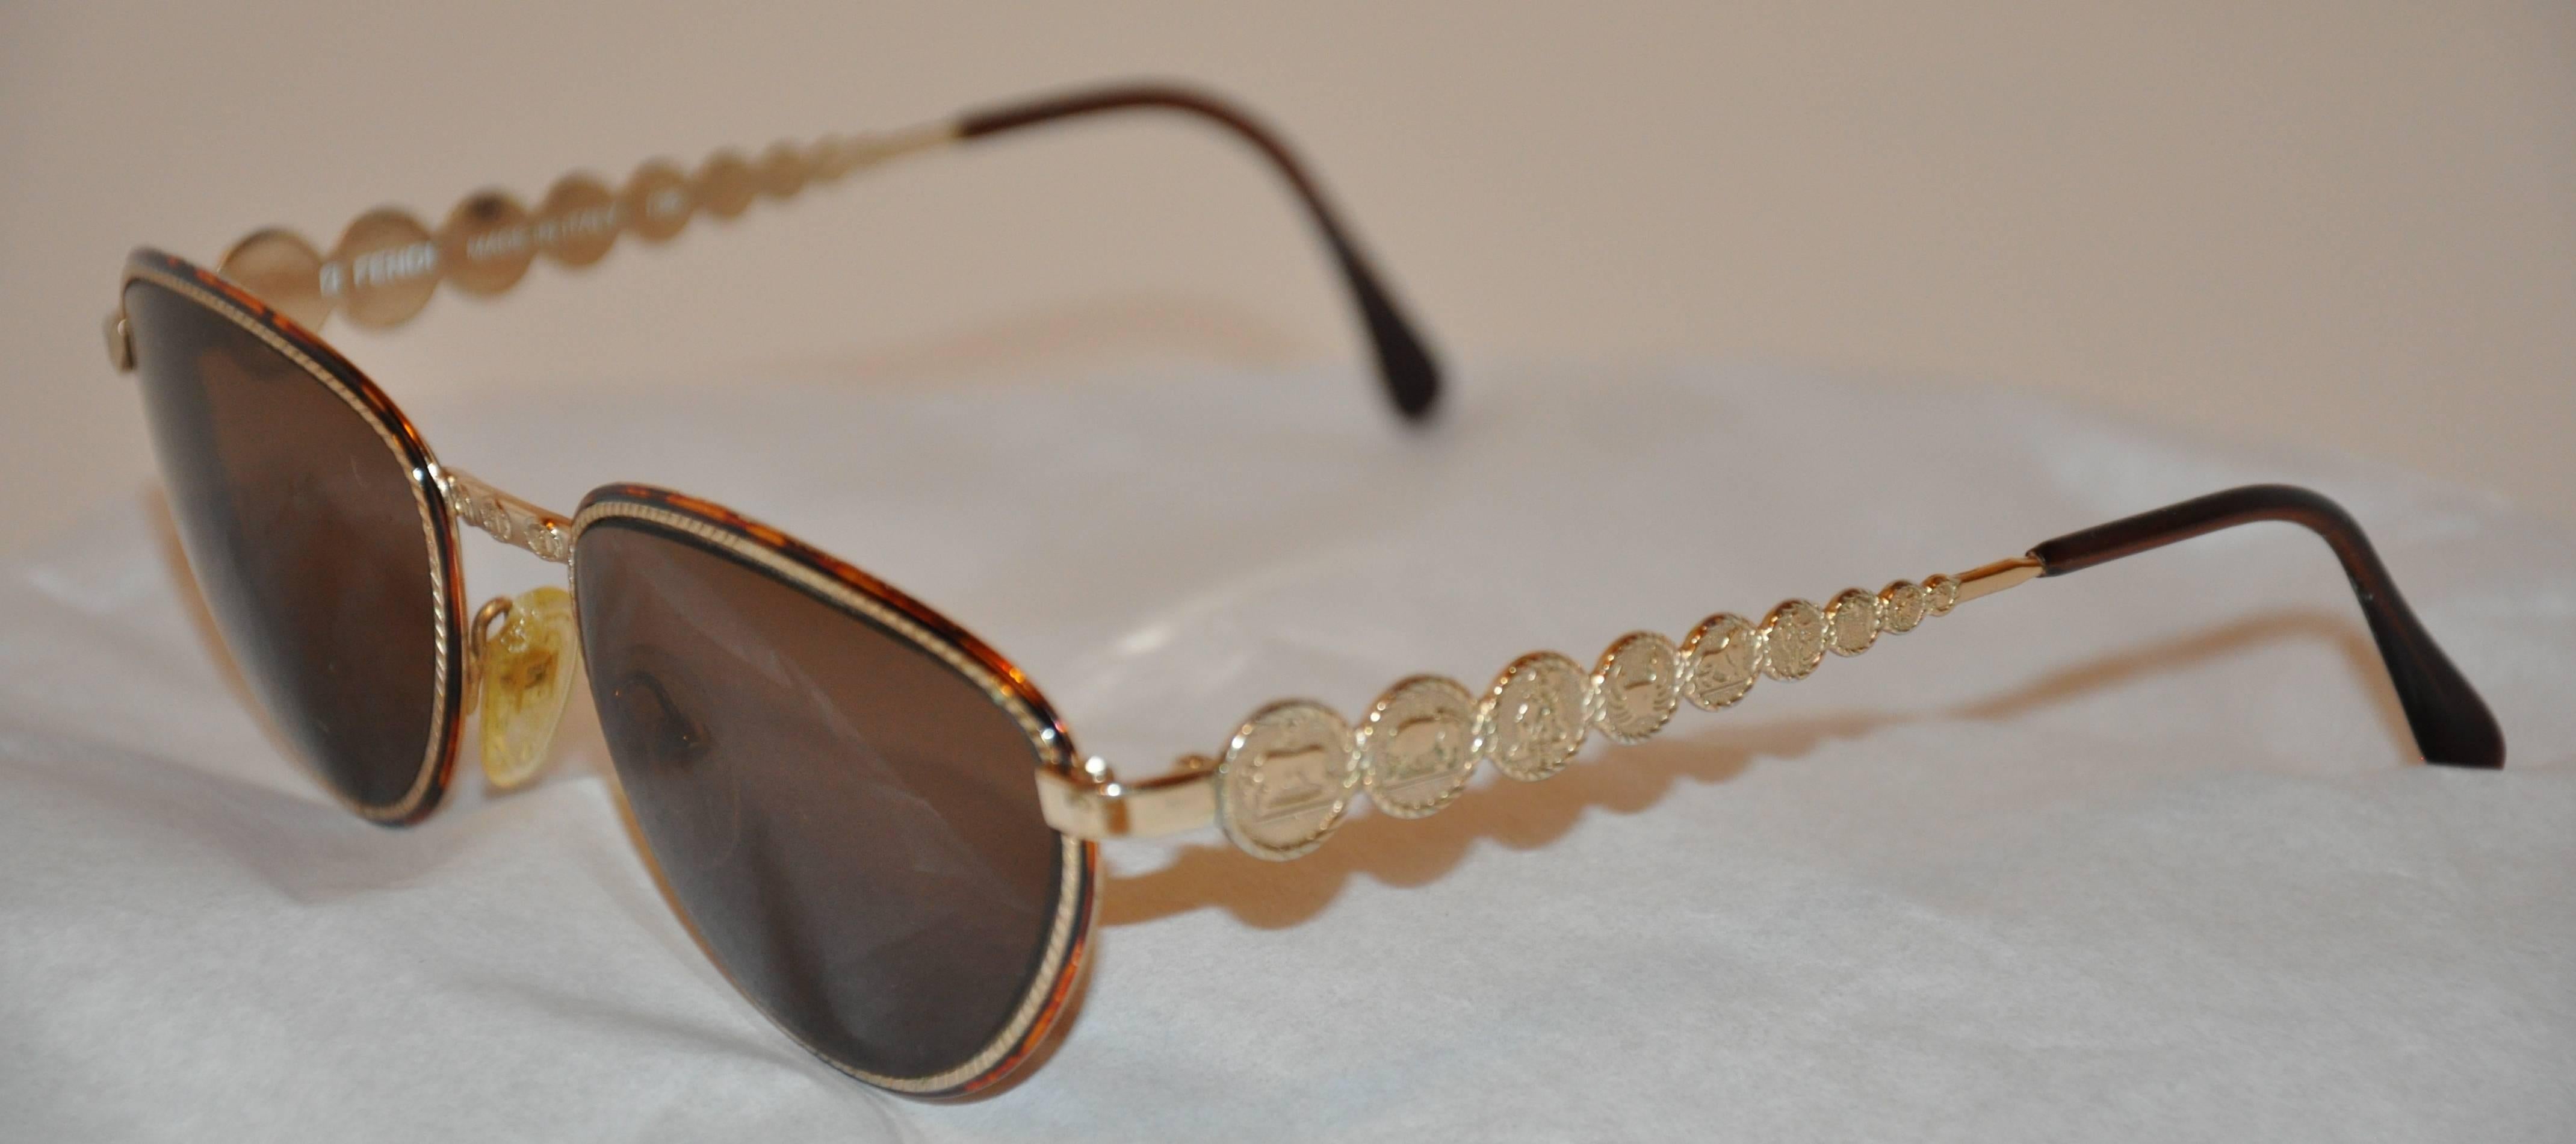        This wonderfully rare detailed Fendi gilded gold sunglasses are etched with signs of the 